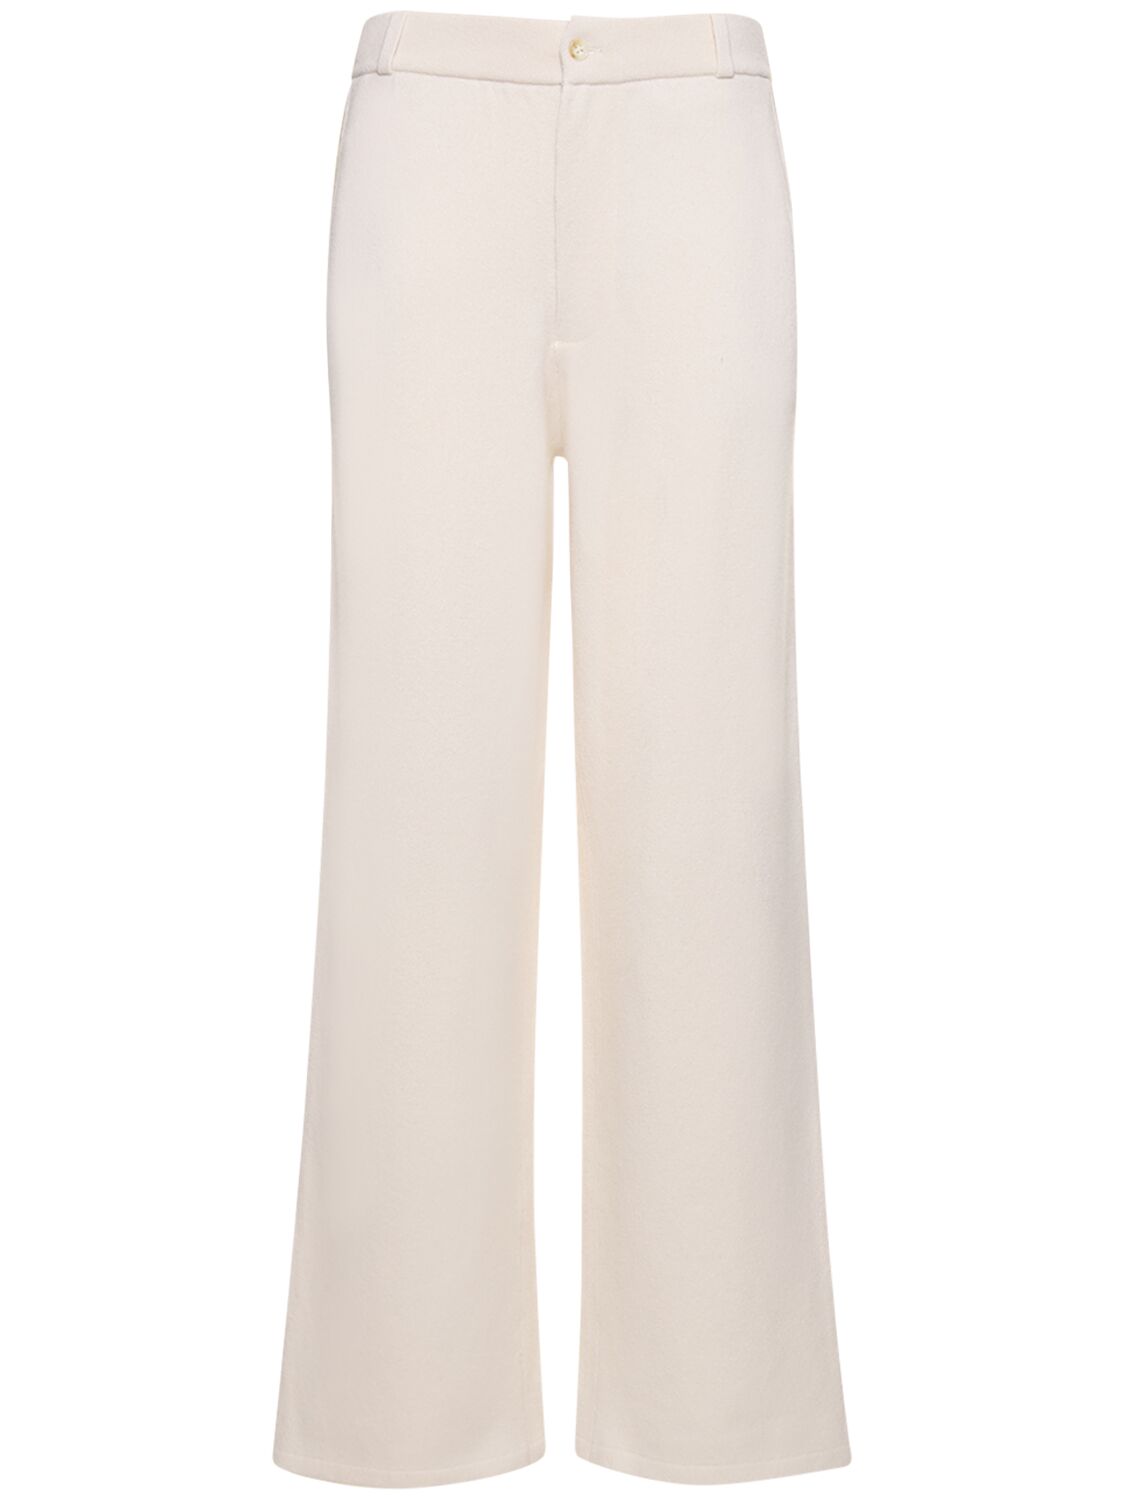 Image of Tailored Cashmere Pants